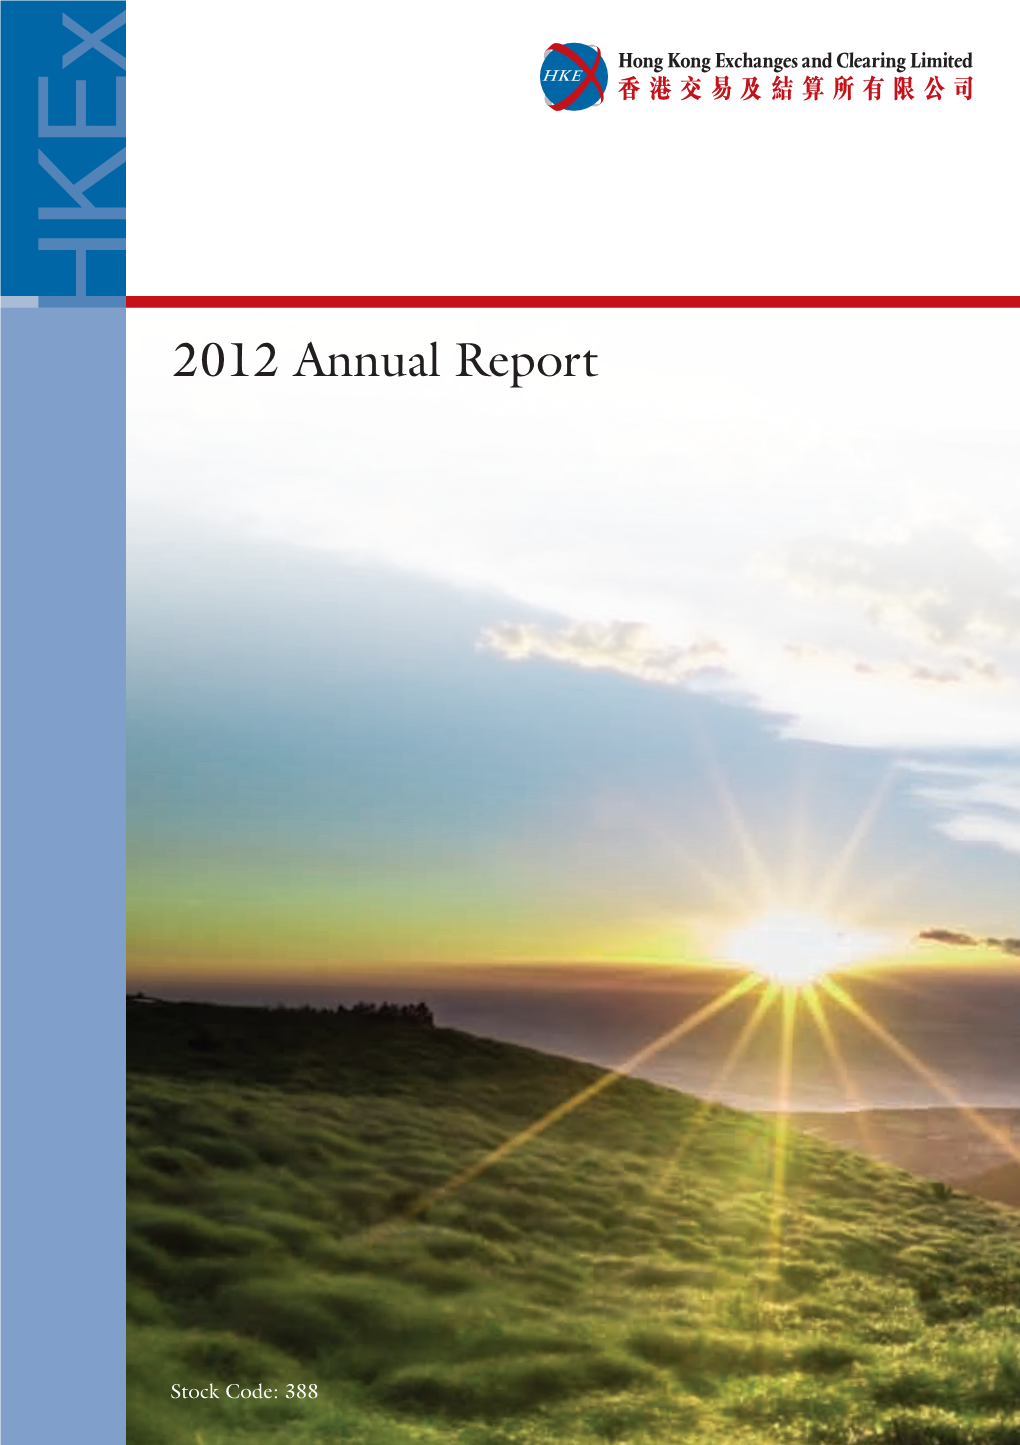 2012 Annual Report Highlights of the Year